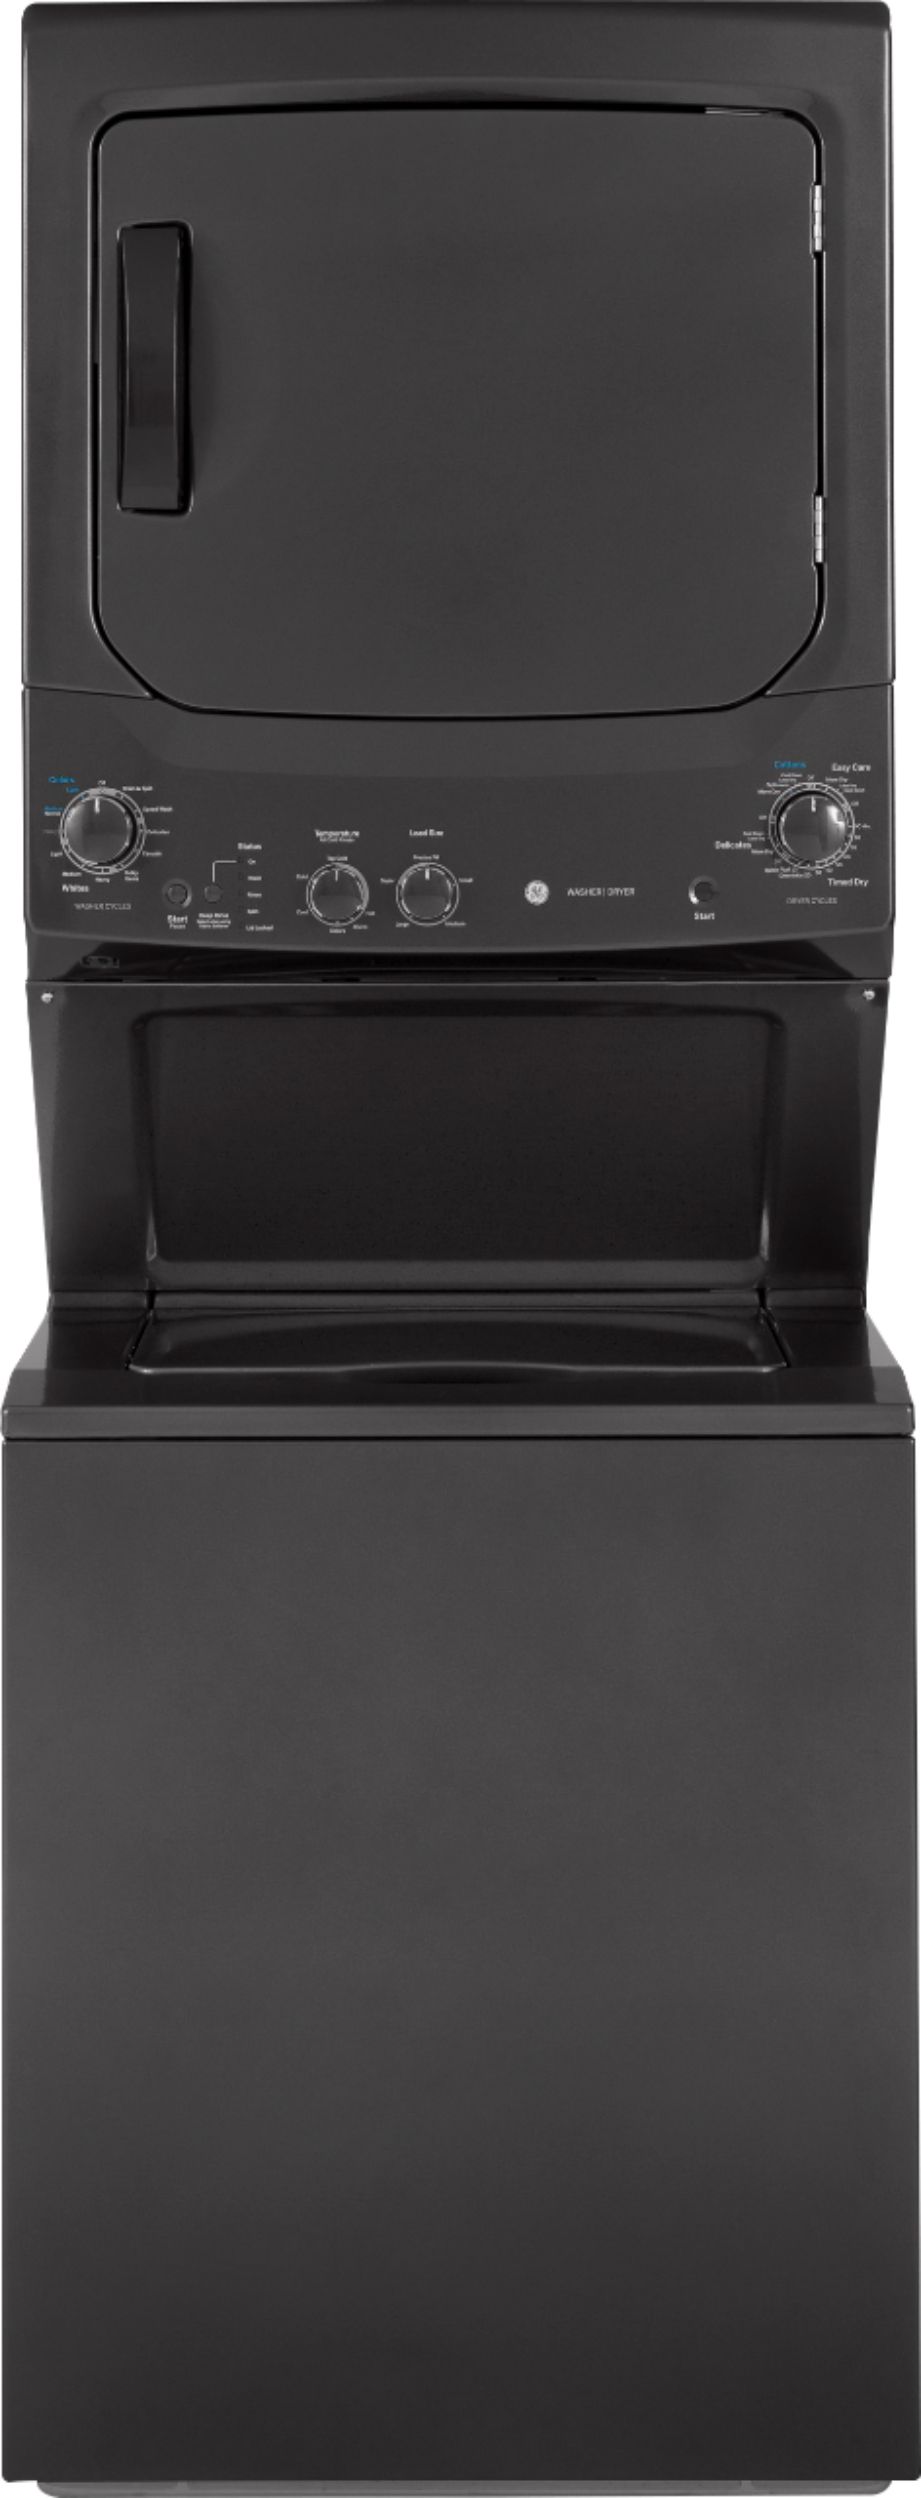 GE - 3.8 Cu. Ft. Top Load Washer and 5.9 Cu. Ft. Gas Dryer Laundry Center - Diamond gray